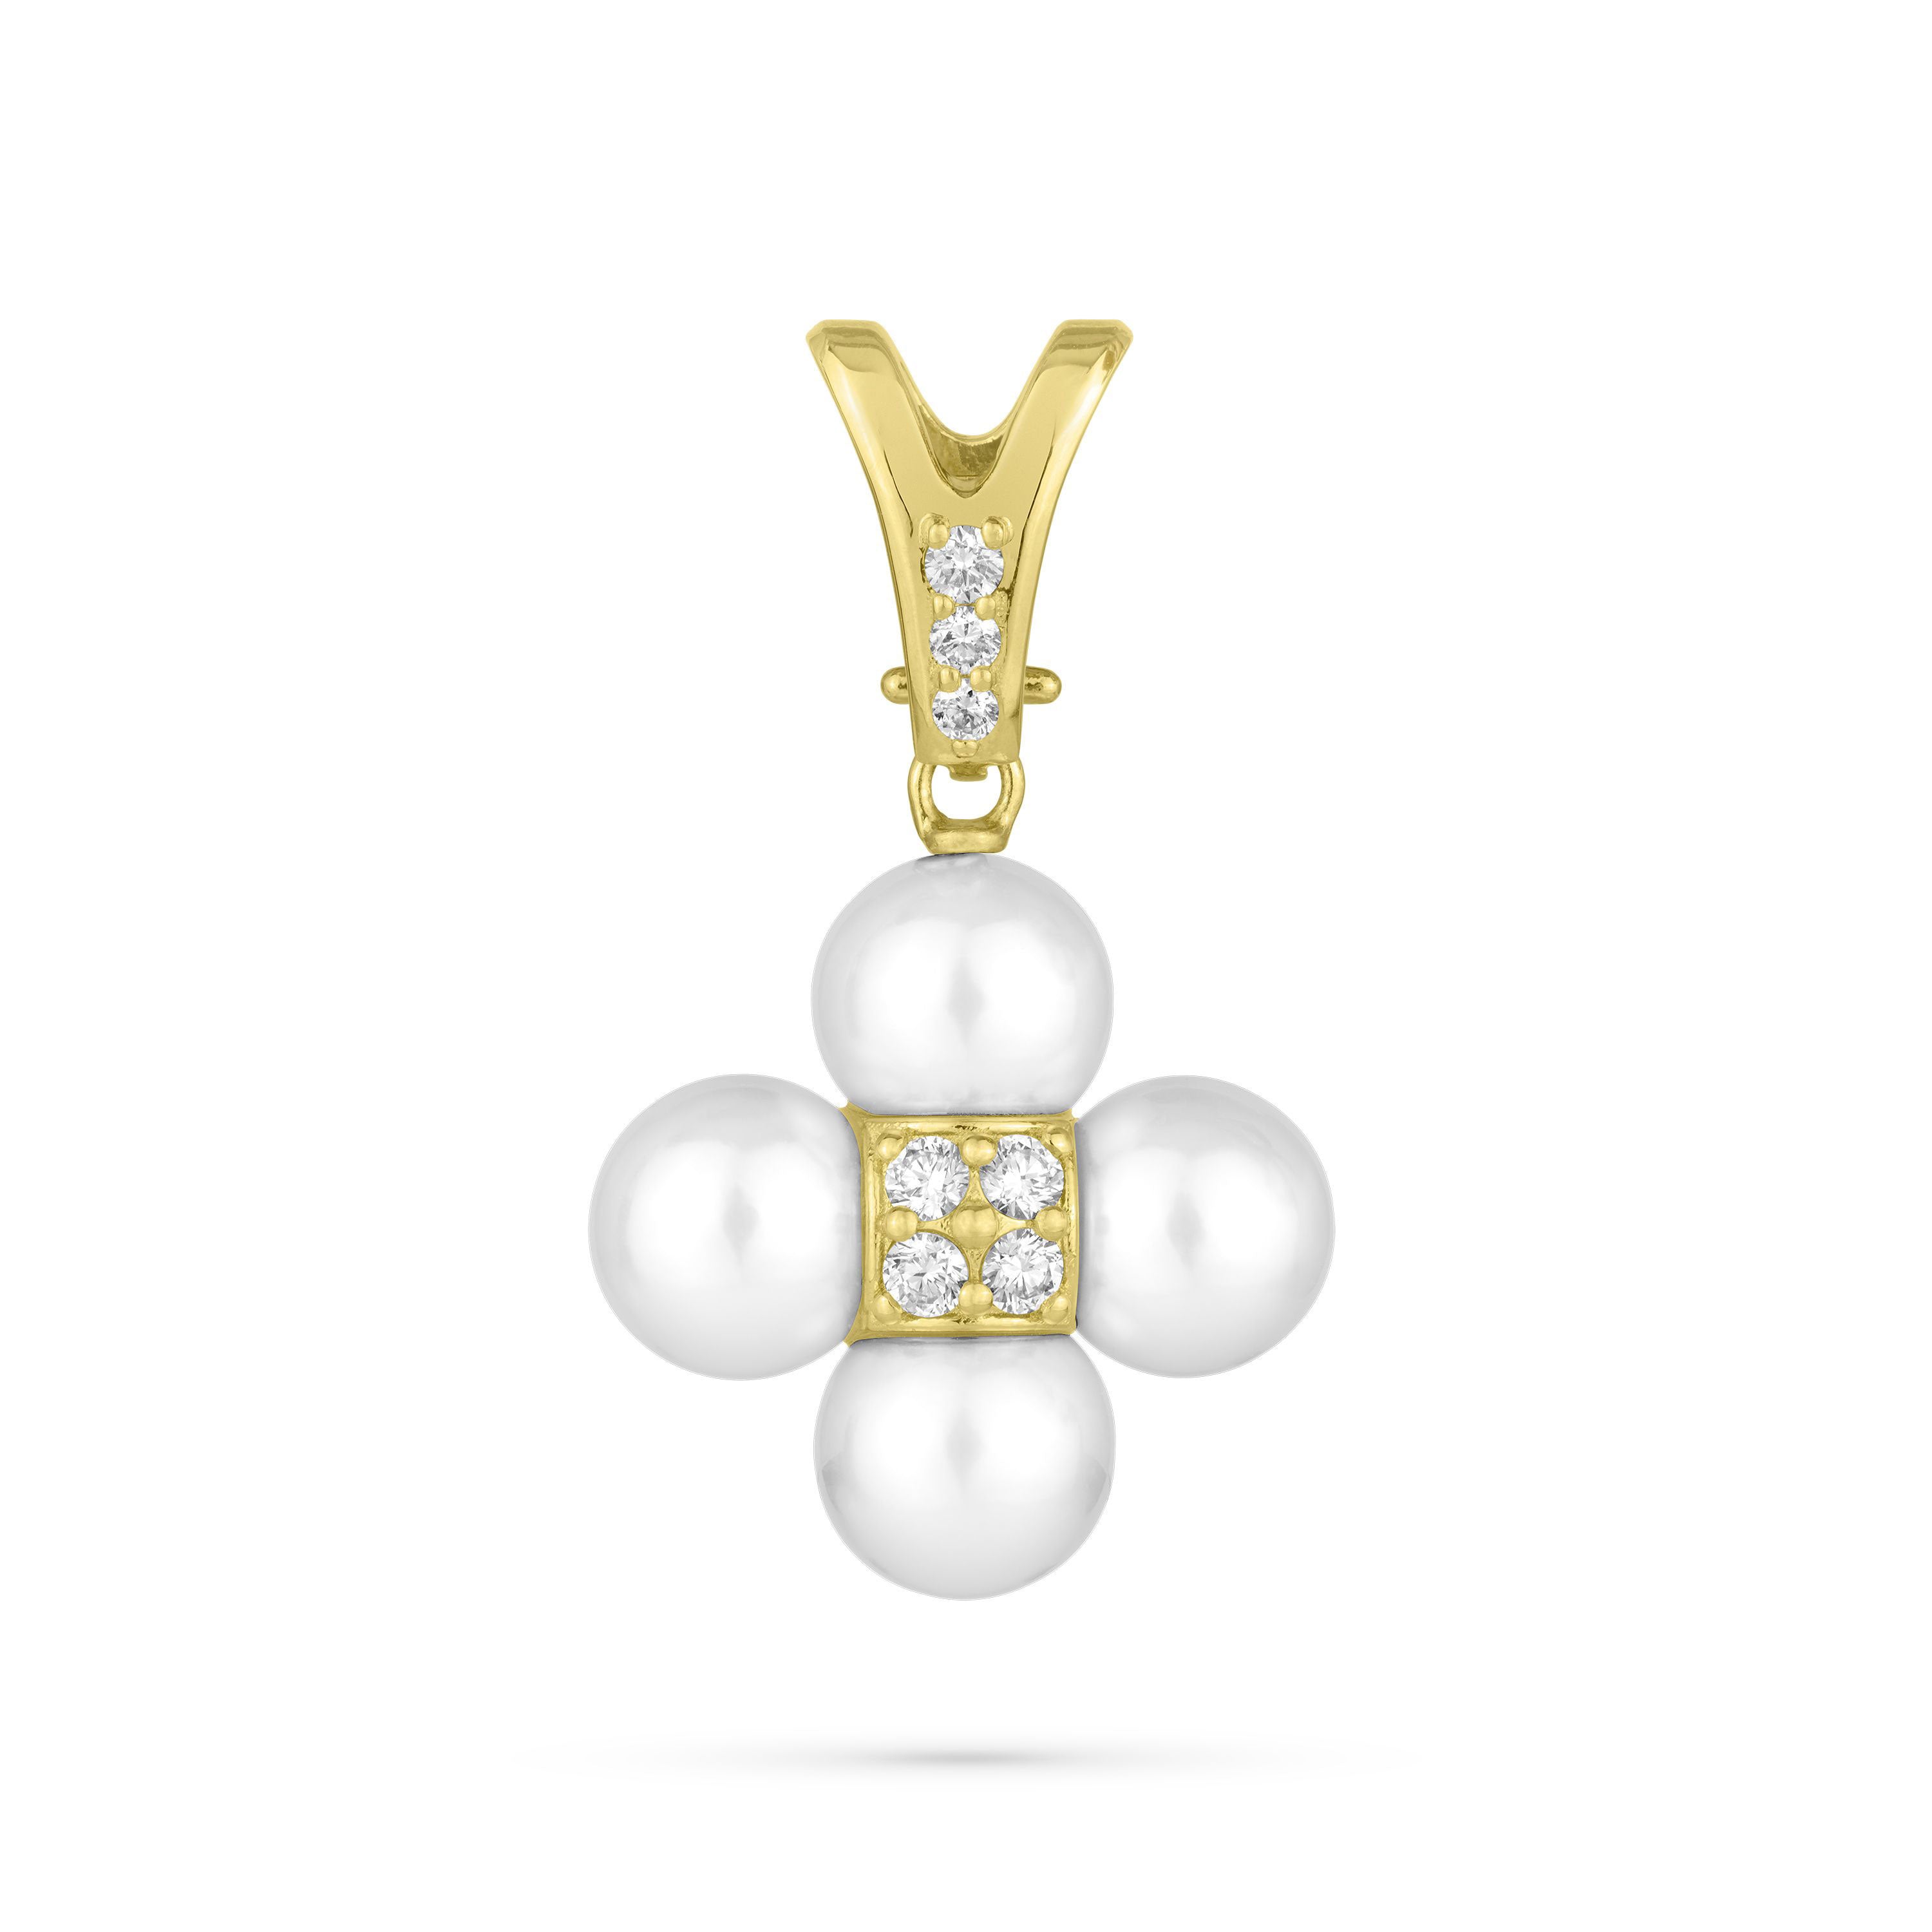 Paul Morelli Pearl Sequence Slider Charm - Be On Park